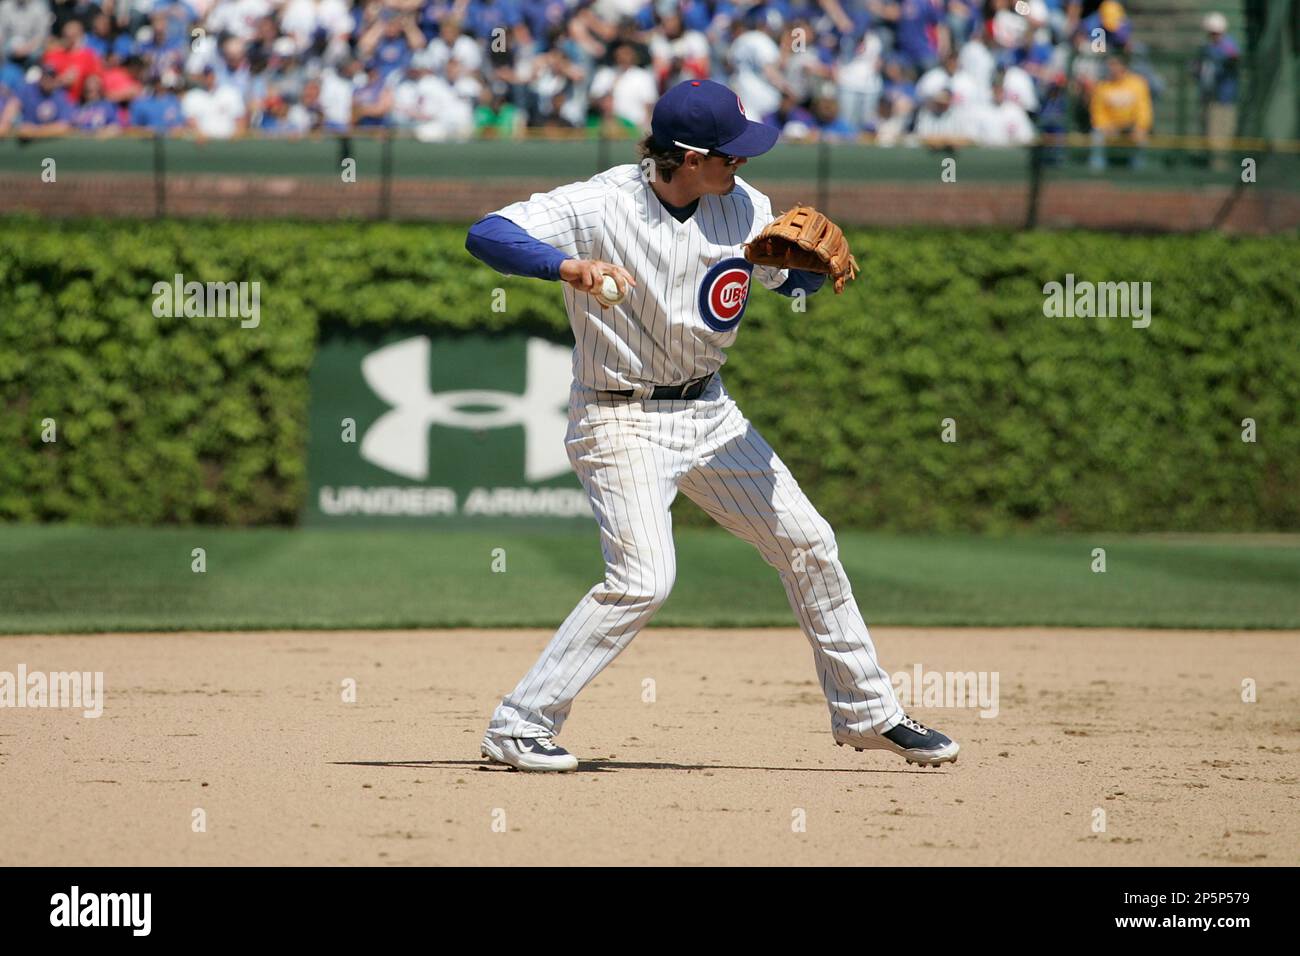 CHICAGO, IL- MAY 17: Shortstop Ryan Theriot #2 of the Chicago Cubs